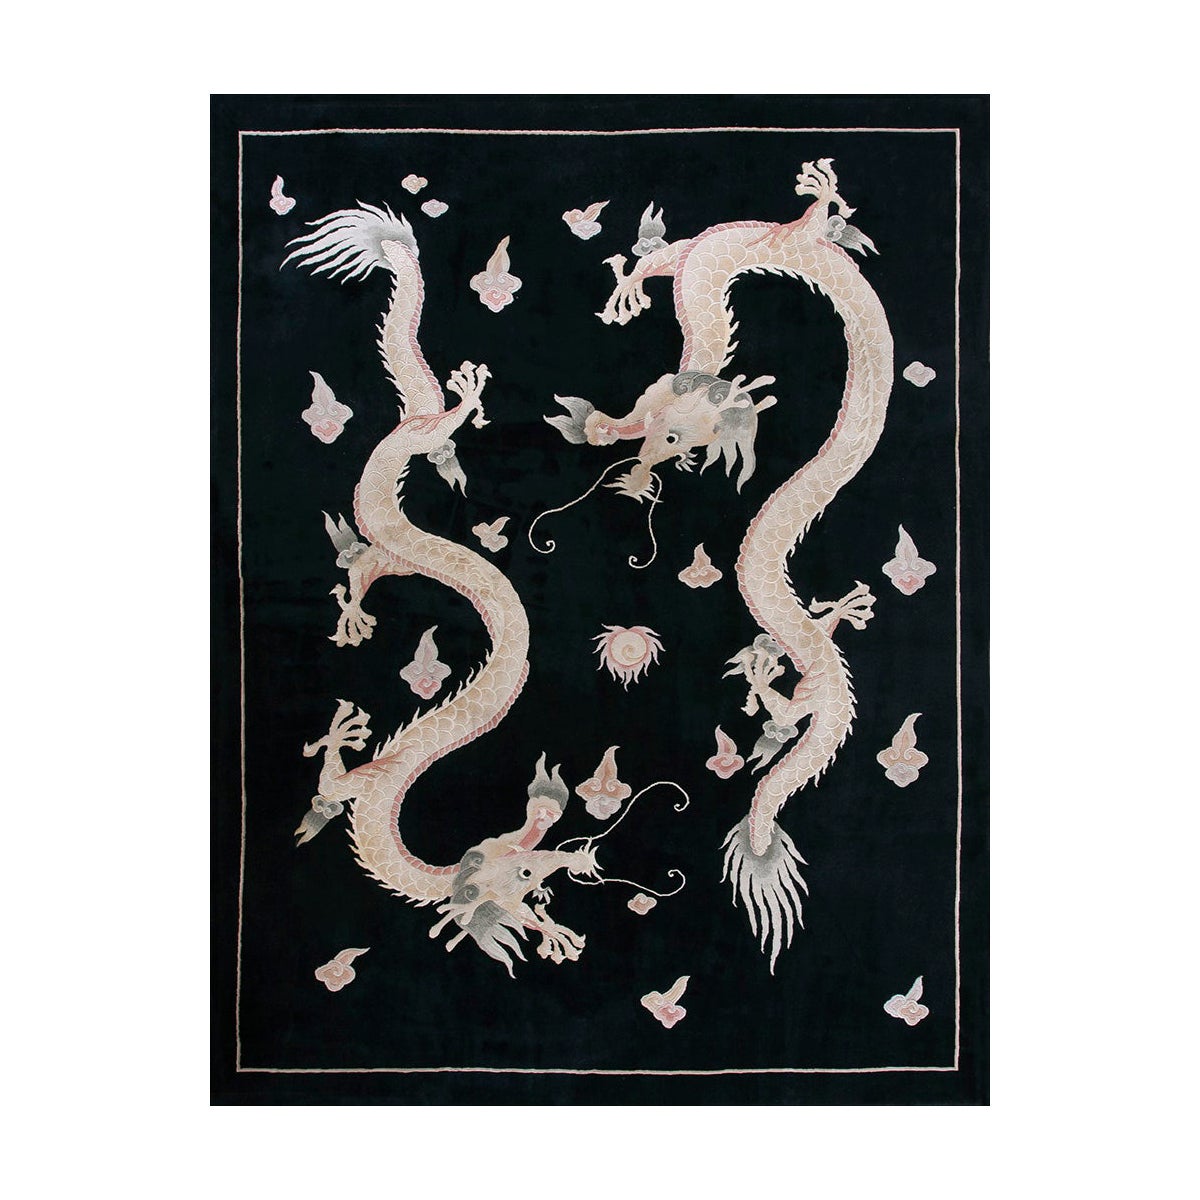 Chinese Art Deco Style Carpet with Dragons ( 9'x 12' - 275 x 365 )